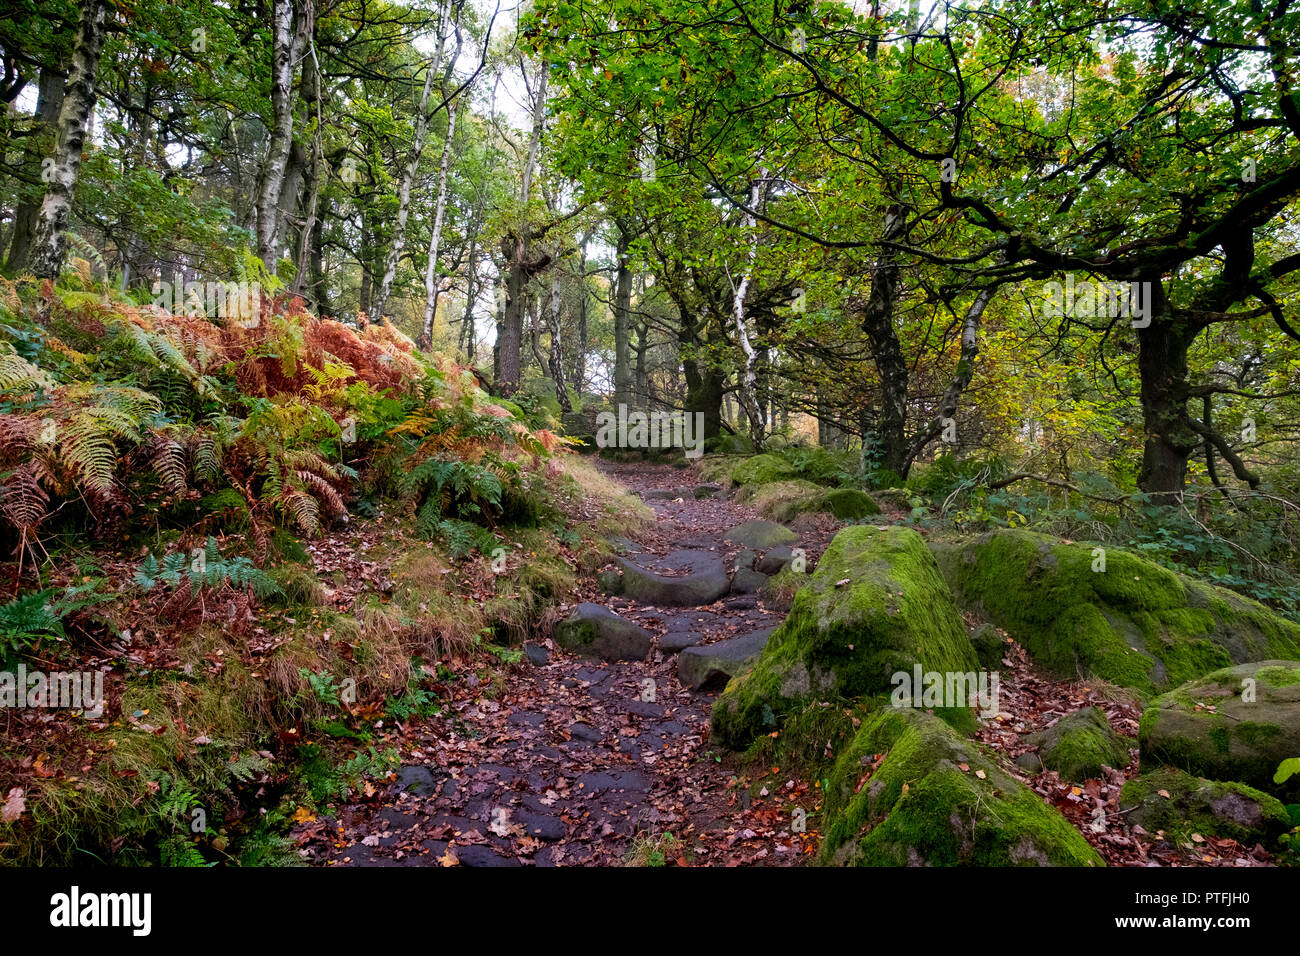 Padley Gorge in the Peak District National Park. Pathway leading through the autumn colour in the trees and bracken. Stock Photo